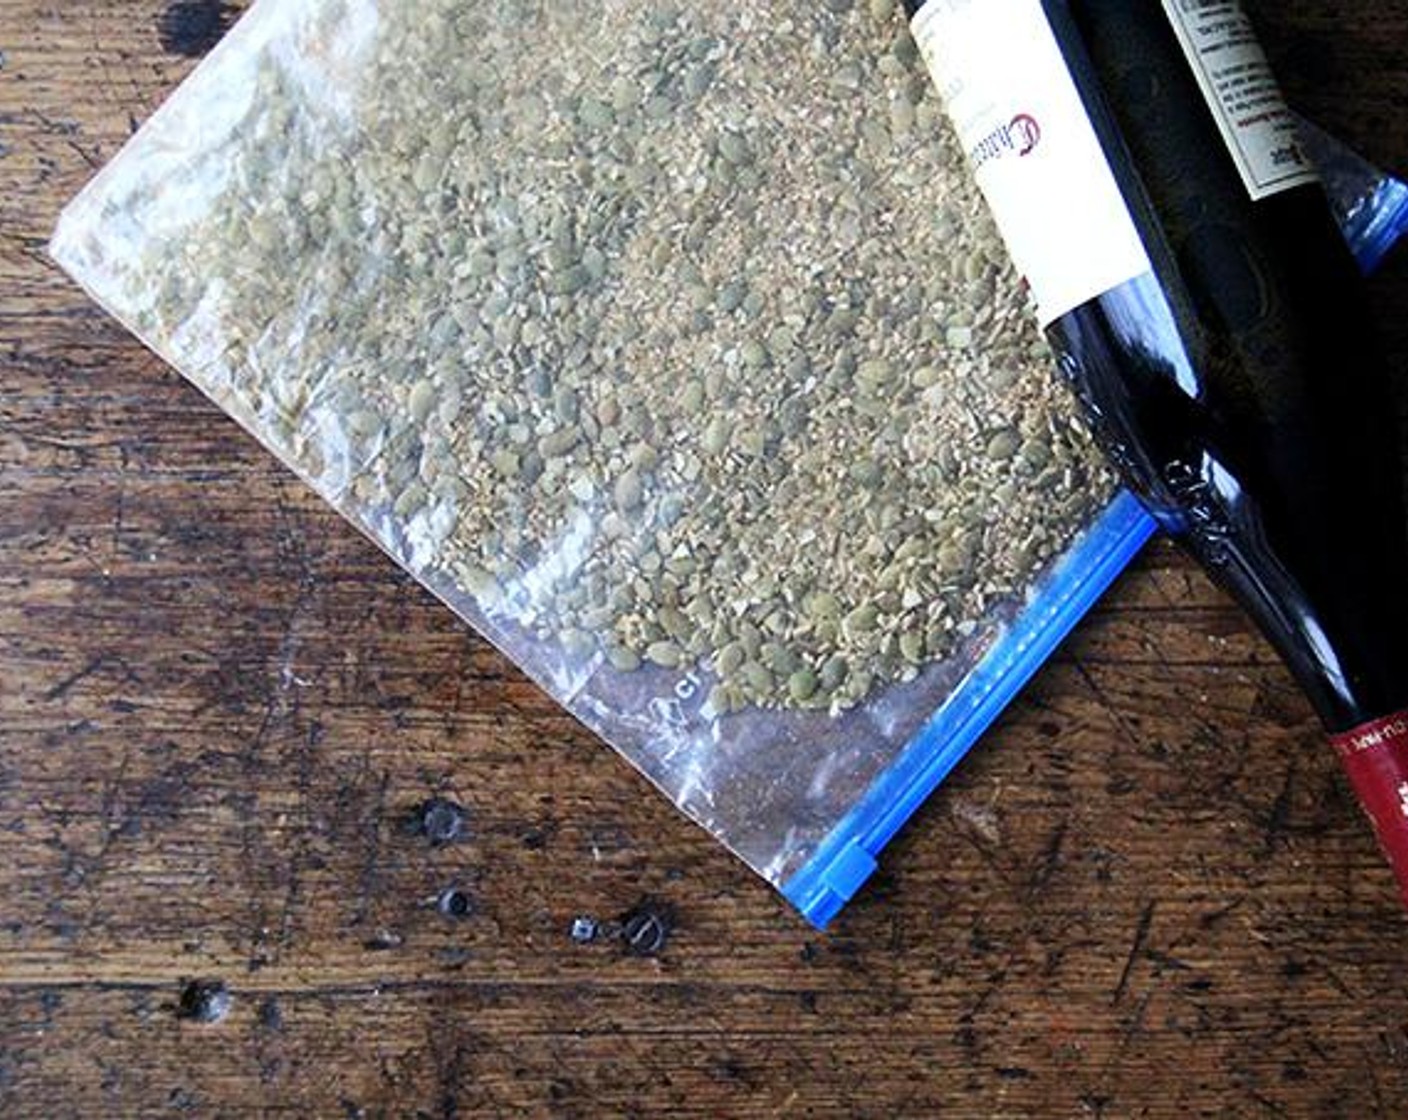 step 6 Place the seeds in a zip-lock bag. Holding a wine bottle by the neck, gently tap the bottom of the bottle against the seeds until they are crushed, but not uniformly fine like bread crumbs. Transfer the seeds to a small rimmed sheet pan or other similar vessel.